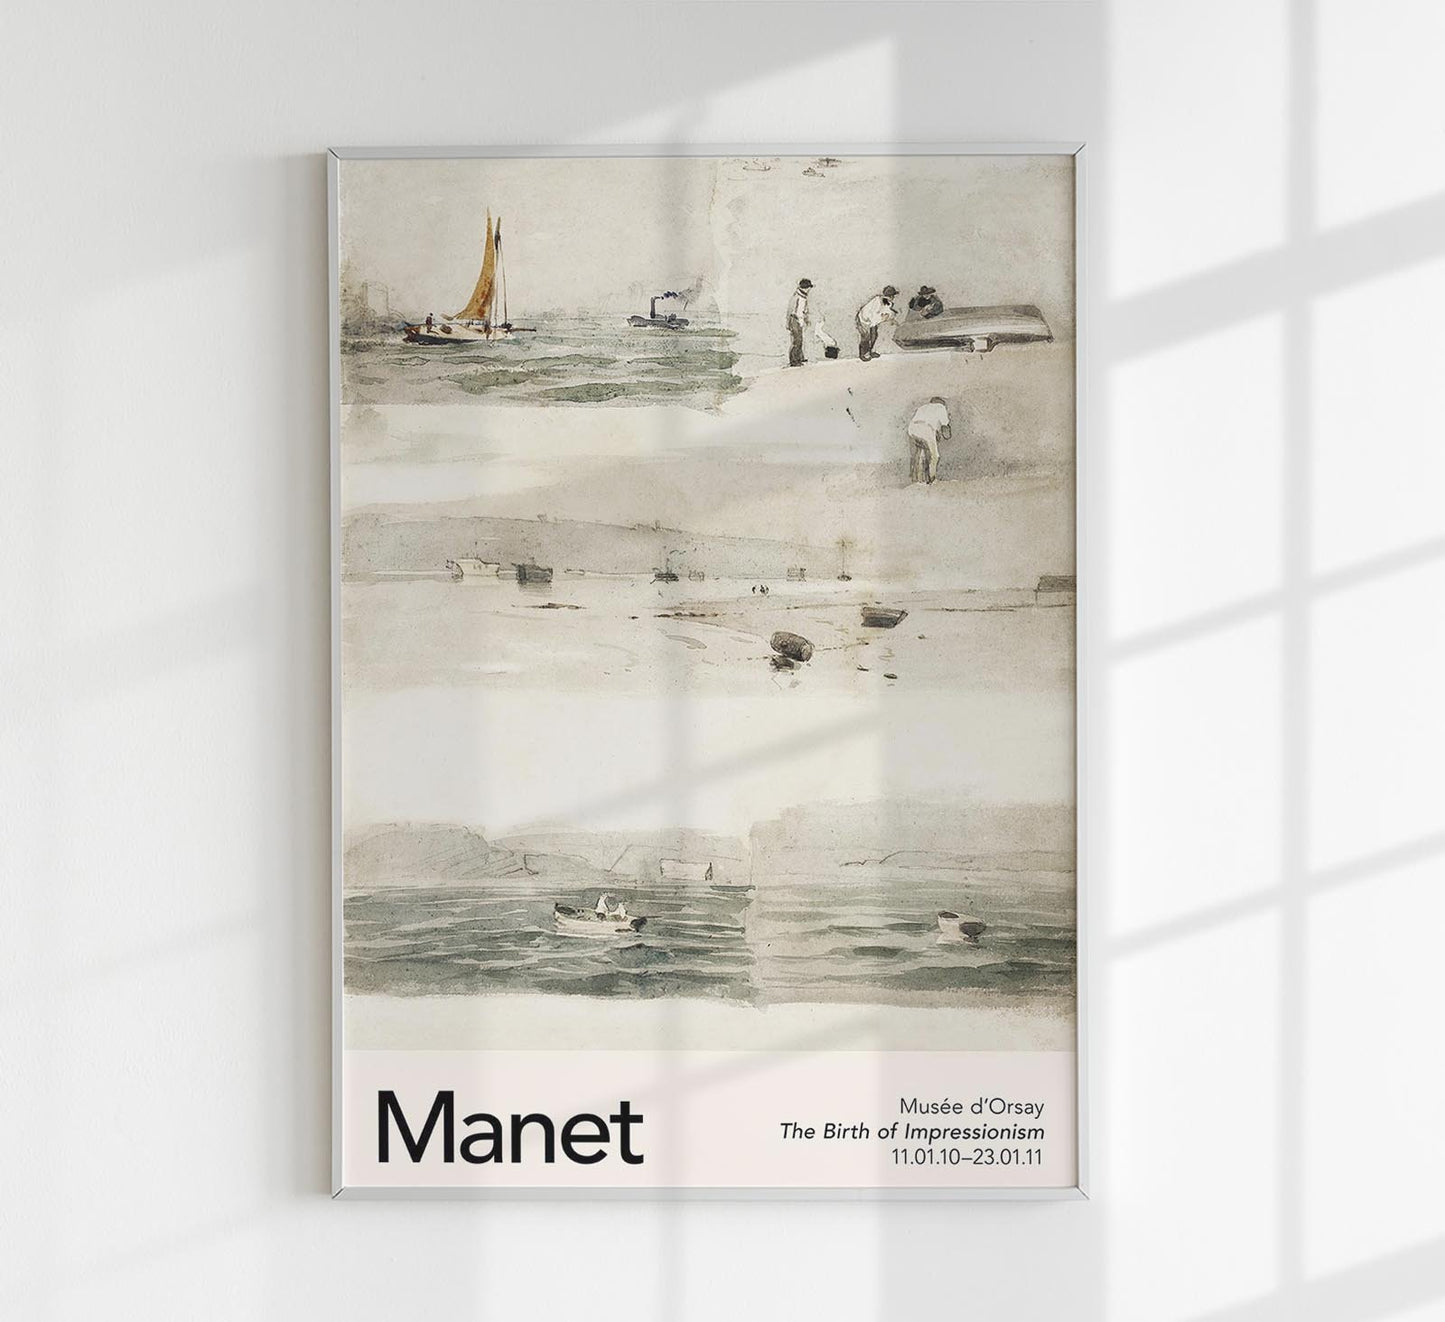 Sketches of Marine Scenes by Manet Exhibition Poster